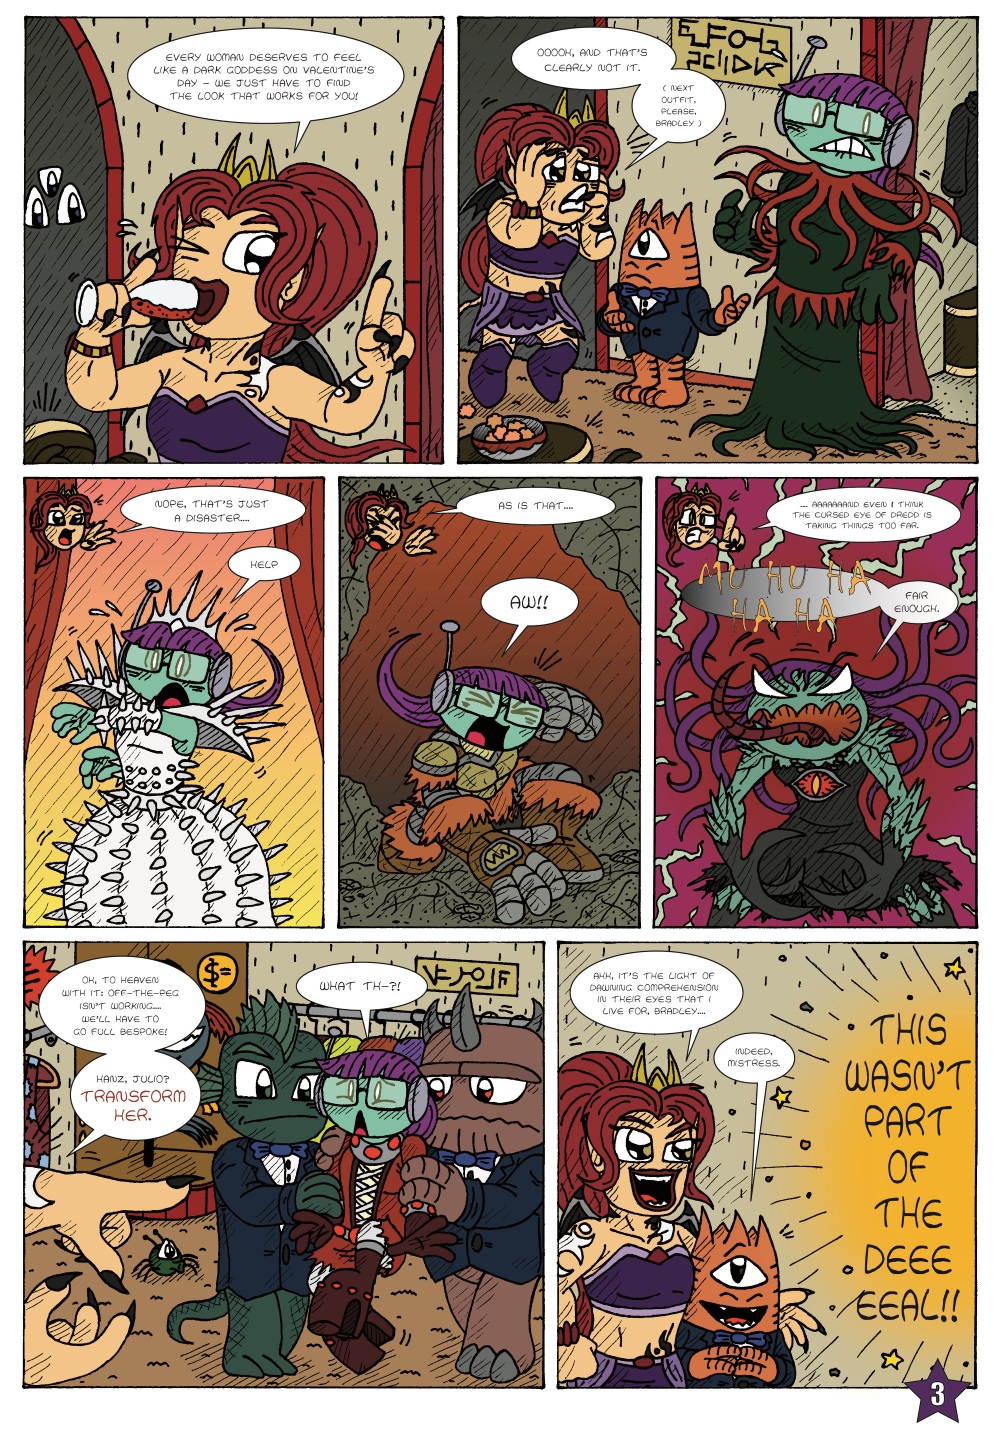 KEISUMA and Myra, Page 3 by Cartoonist_at_Large